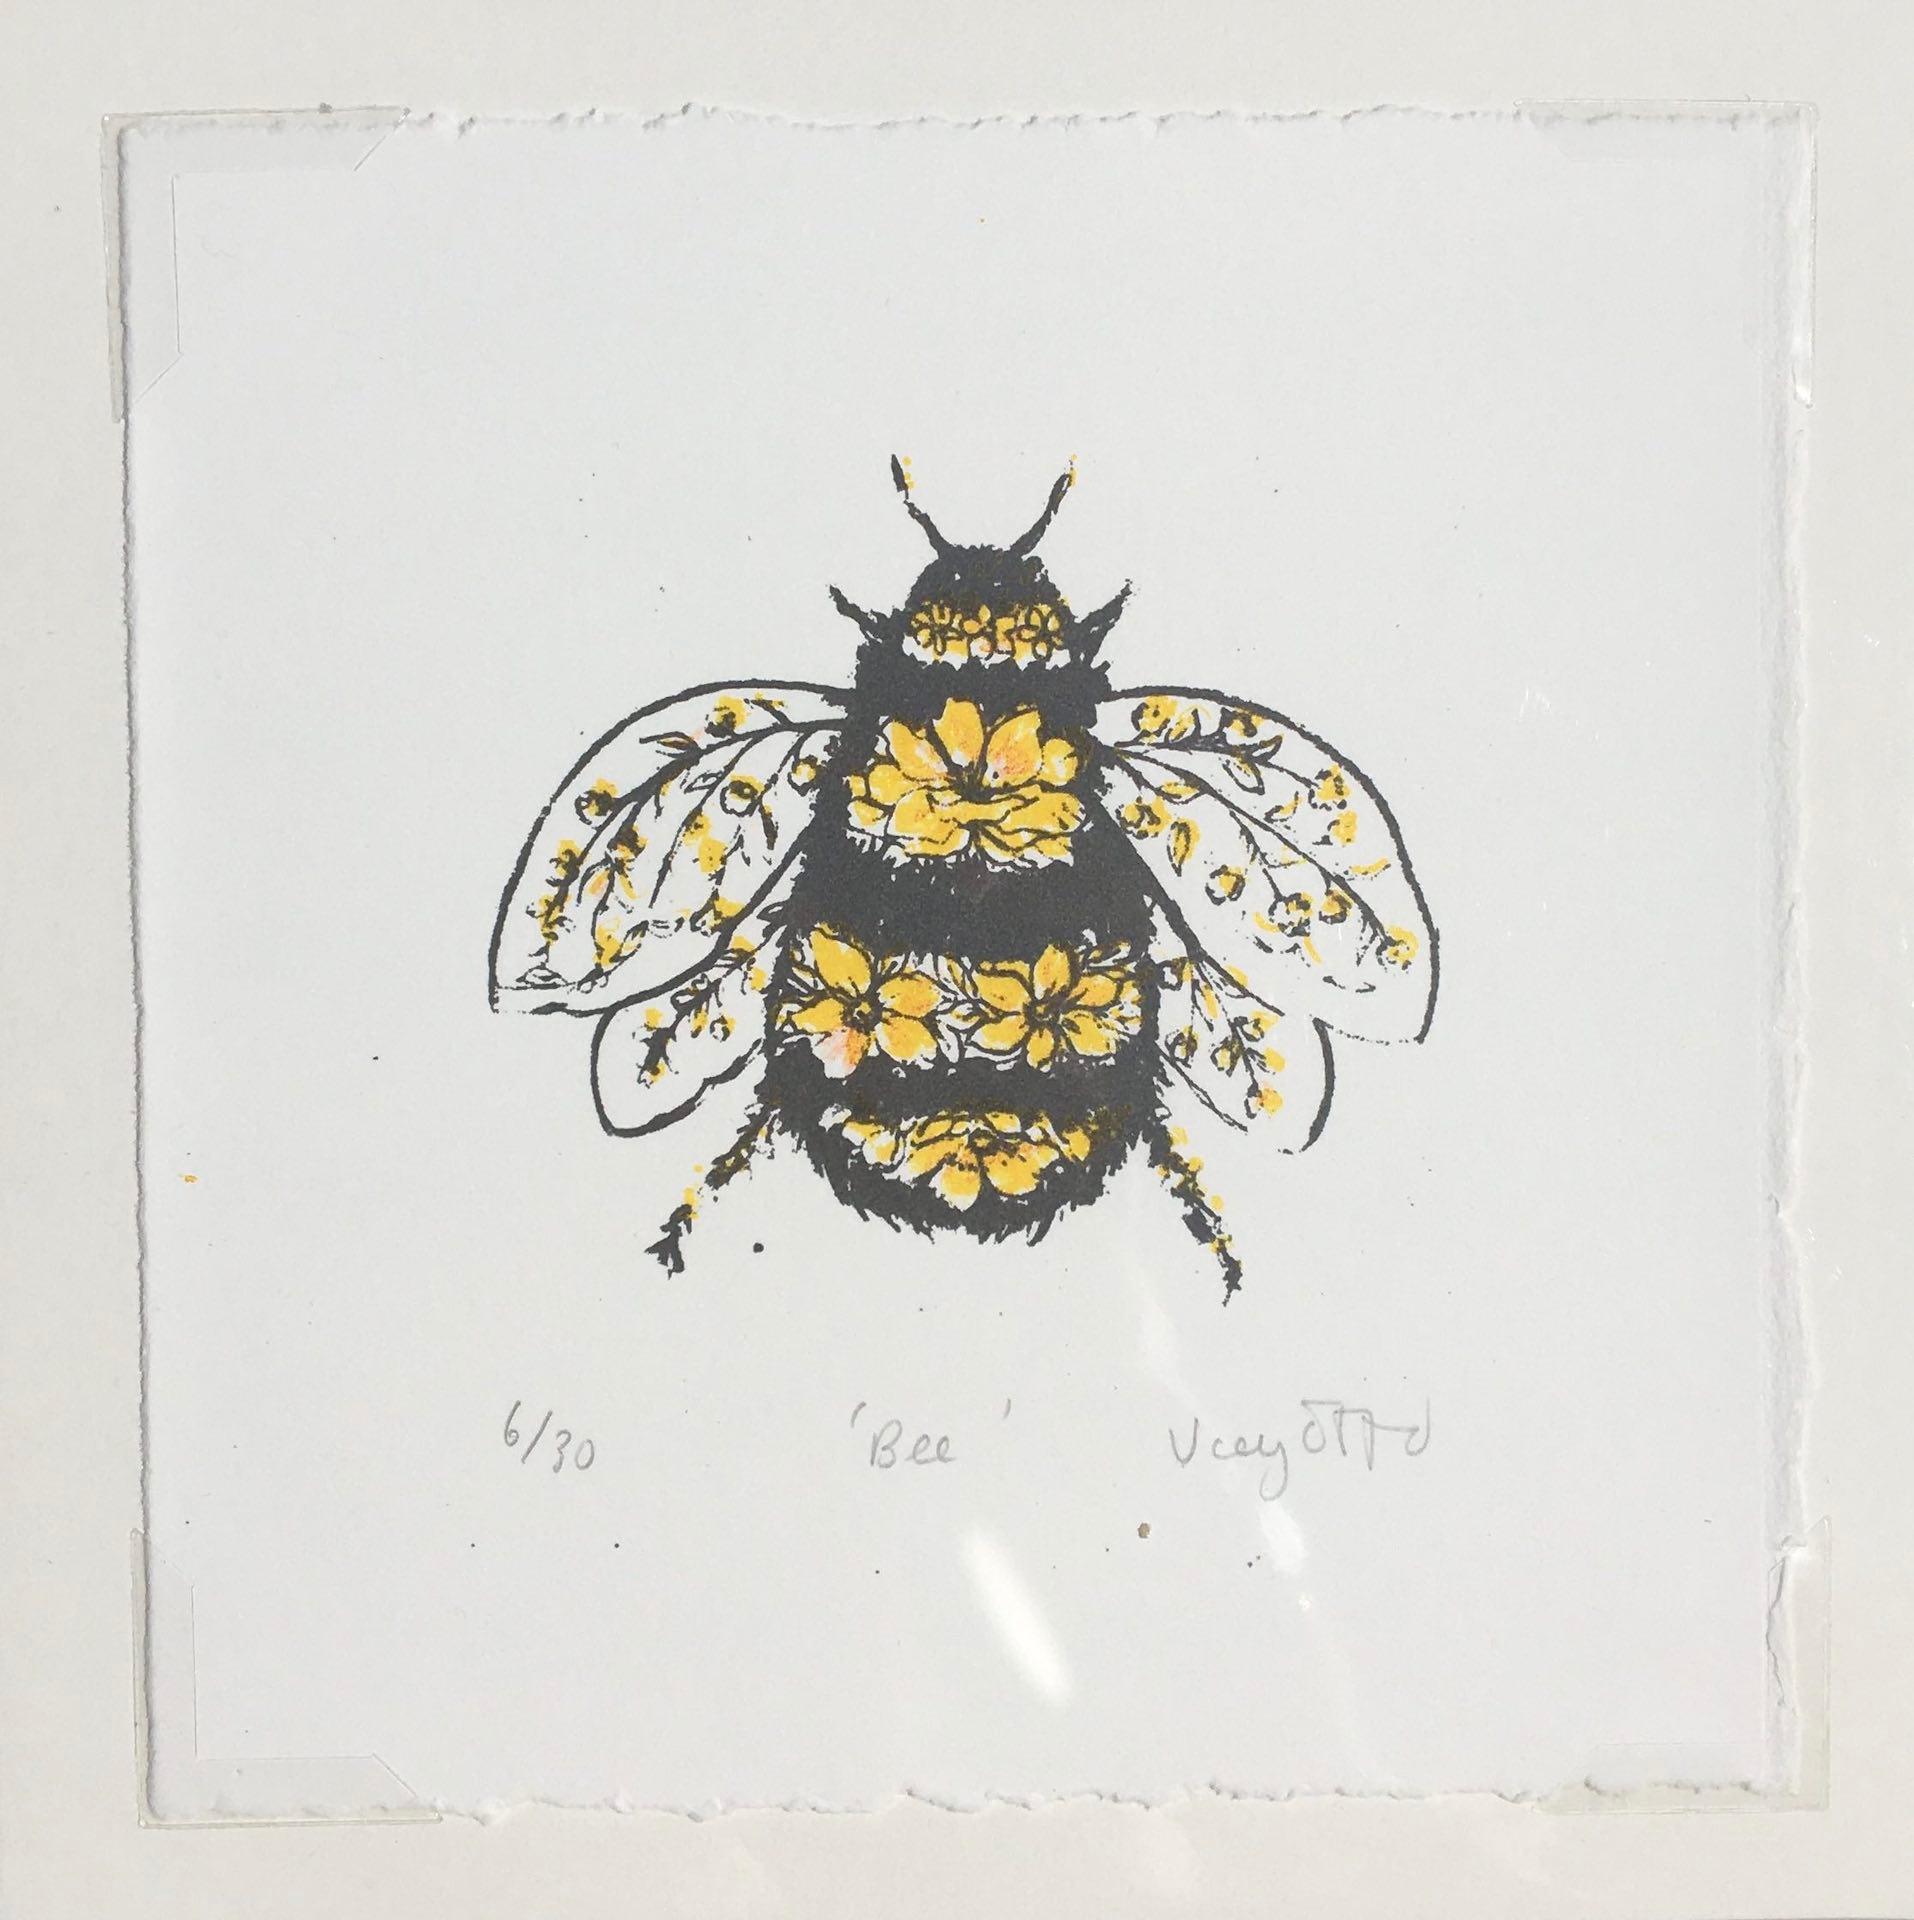 Vicky Oldfield
Bee
Limited Edition Silkscreen Print
Edition of 30
Image Size: H 11cm x W 12cm
Sheet Size: H 17cm x W 17cm x D 0.1cm
Sold Unframed
Please note that insitu images are purely an indication of how a piece may look

Bee is a Limited